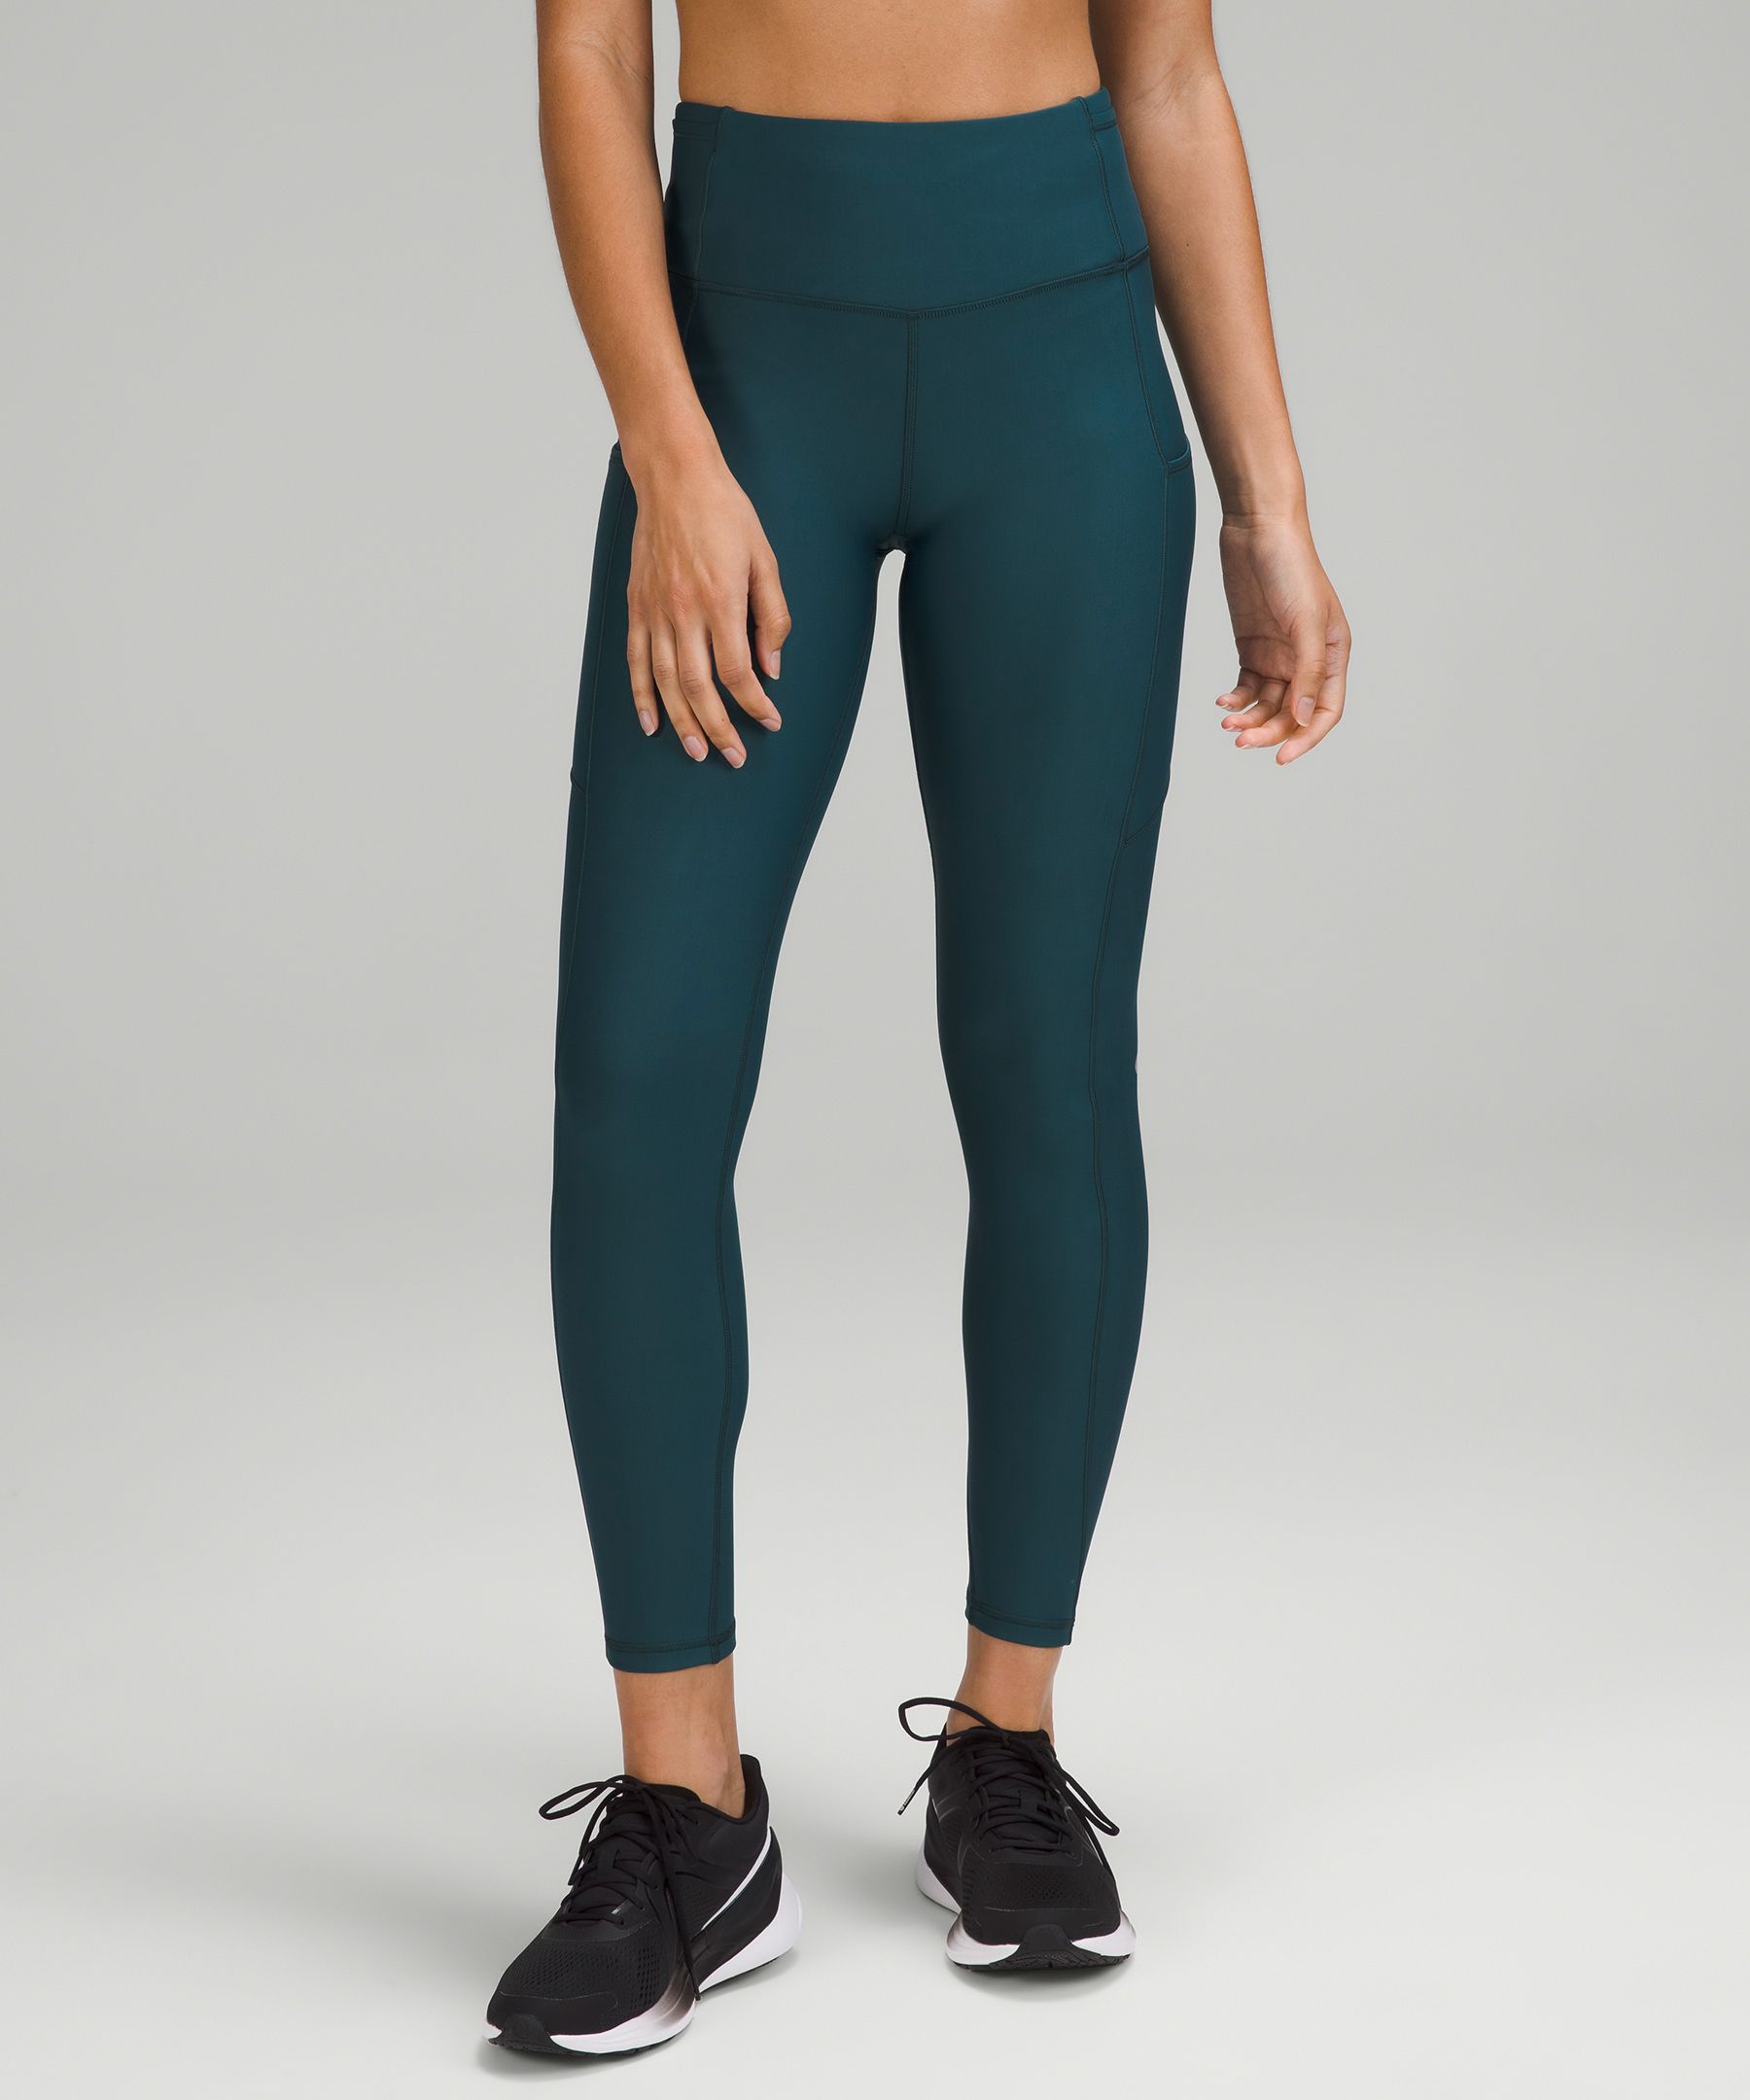 Lululemon Fast Free High-Rise Tight 28” Blue Size 4 - $66 (48% Off Retail)  - From Mia